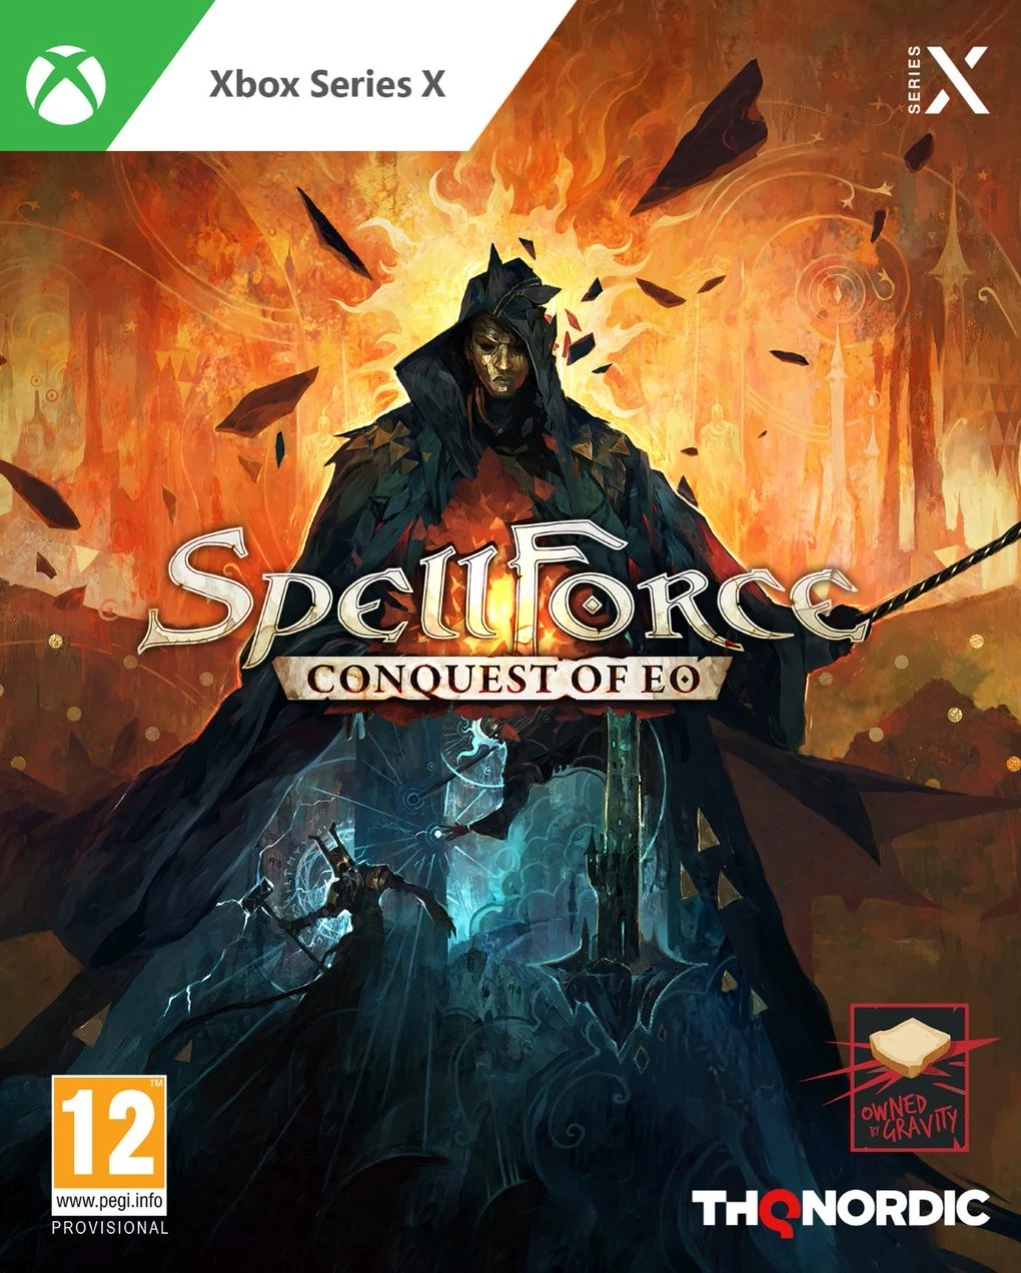 Spellforce: Conquest of Eo (Xbox Series X), Owned by Gravity, THQ Nordic